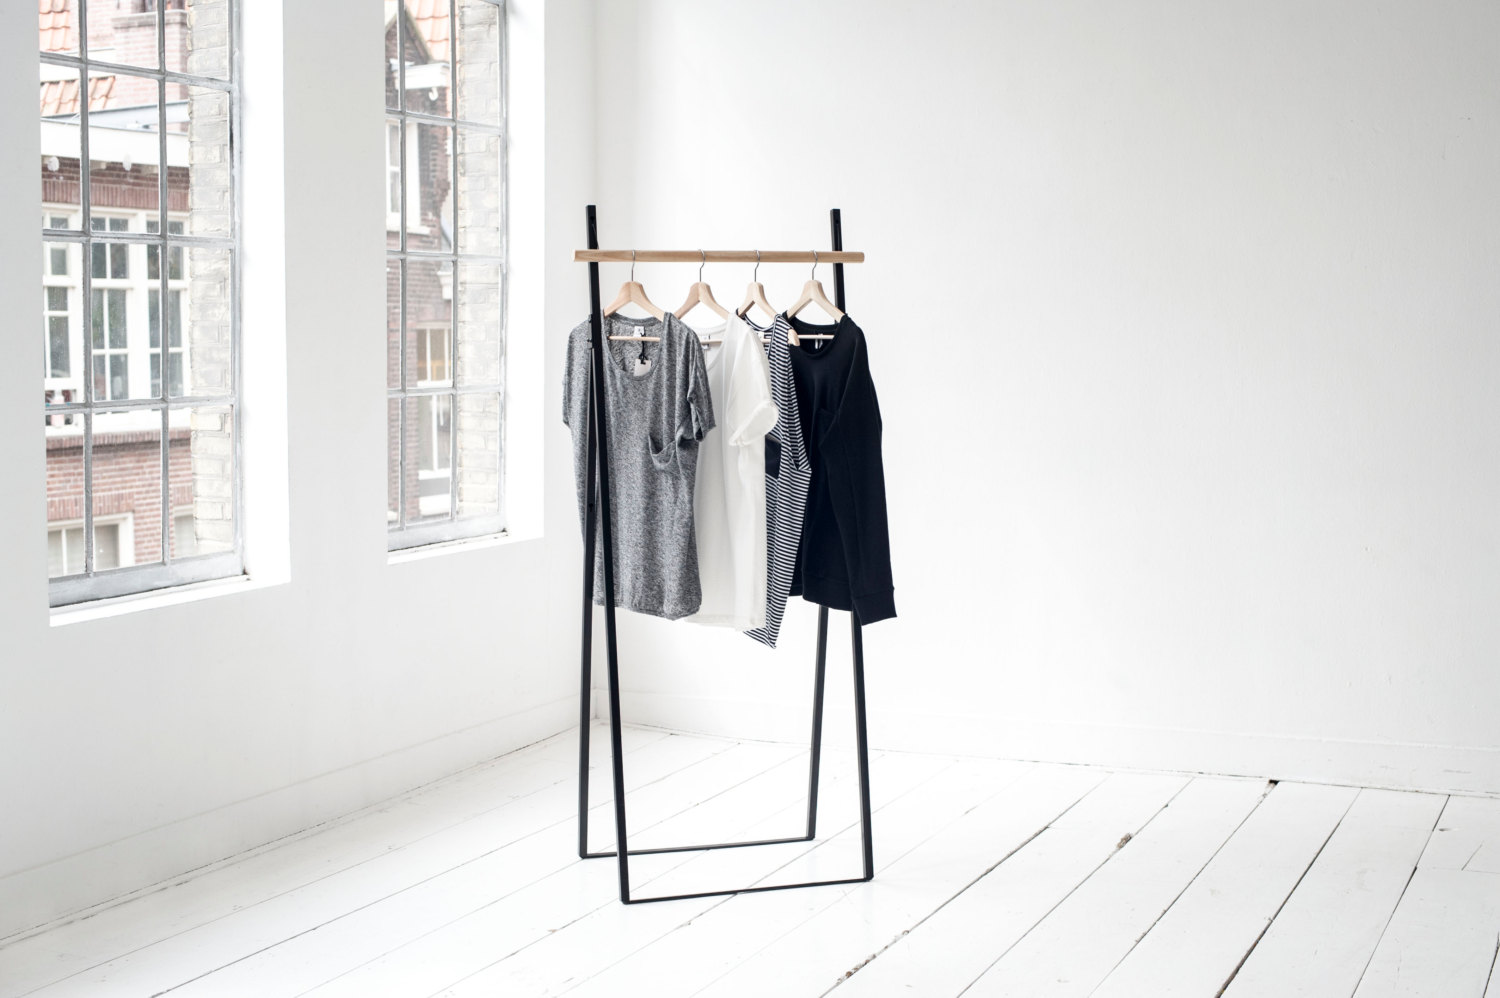 16 Super Simple Clothes Rail Designs That You Can Make By ...